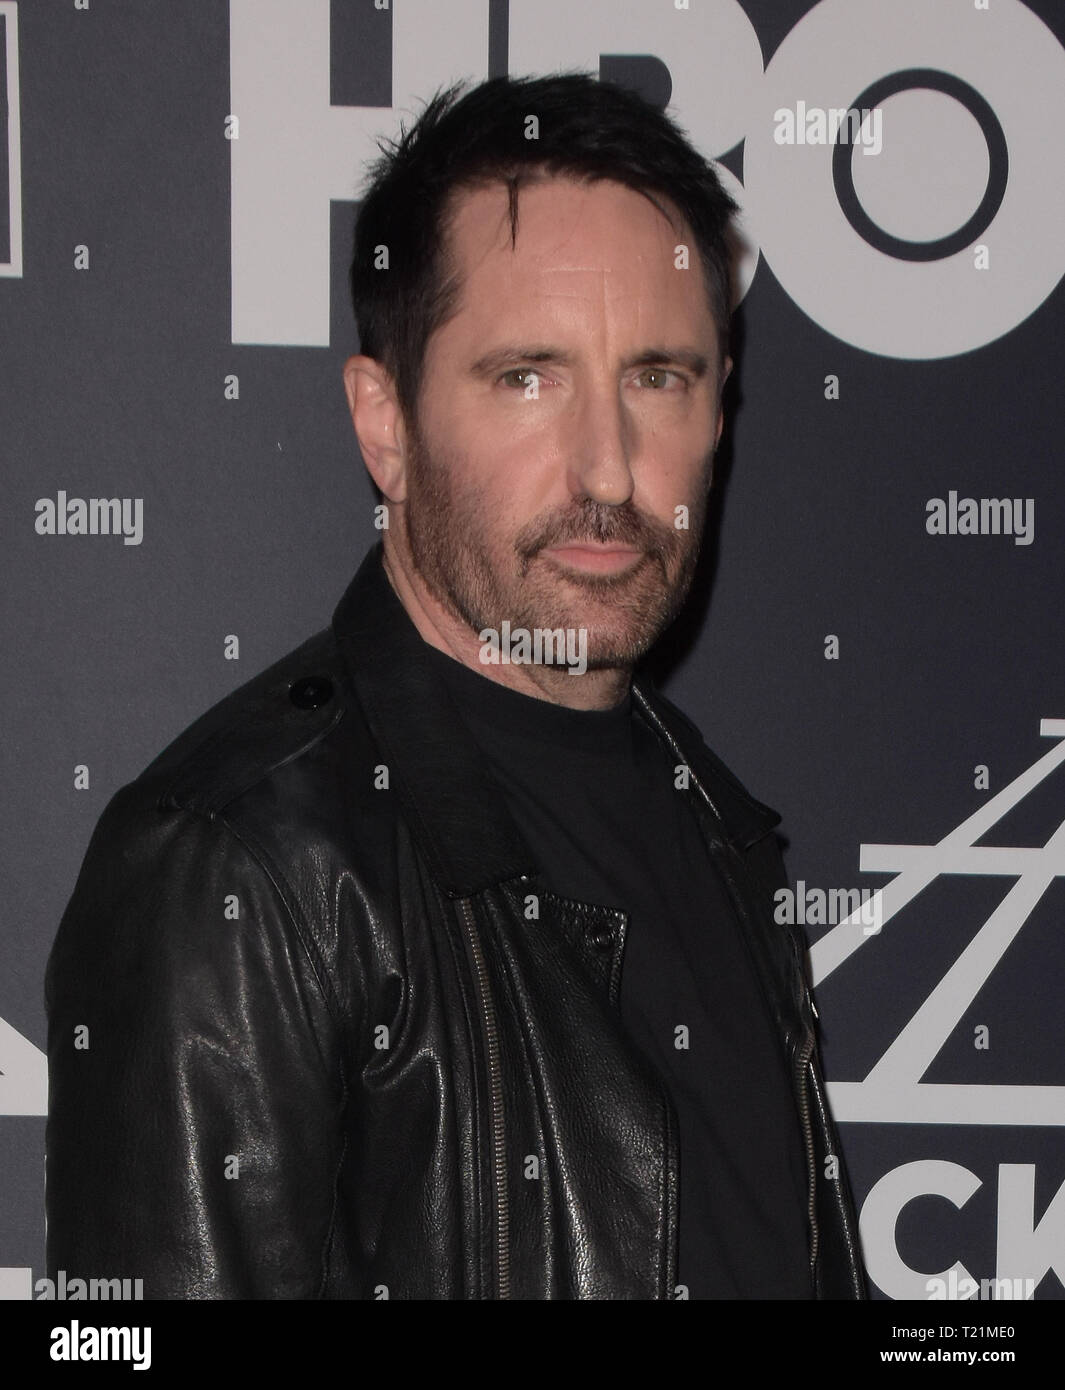 NEW YORK, NEW YORK - MARCH 29: Trent Reznor of Nine Inch Nails attends the  2019 Rock & Roll Hall Of Fame Induction Ceremony at Barclays Center on  March 29, 2019 in